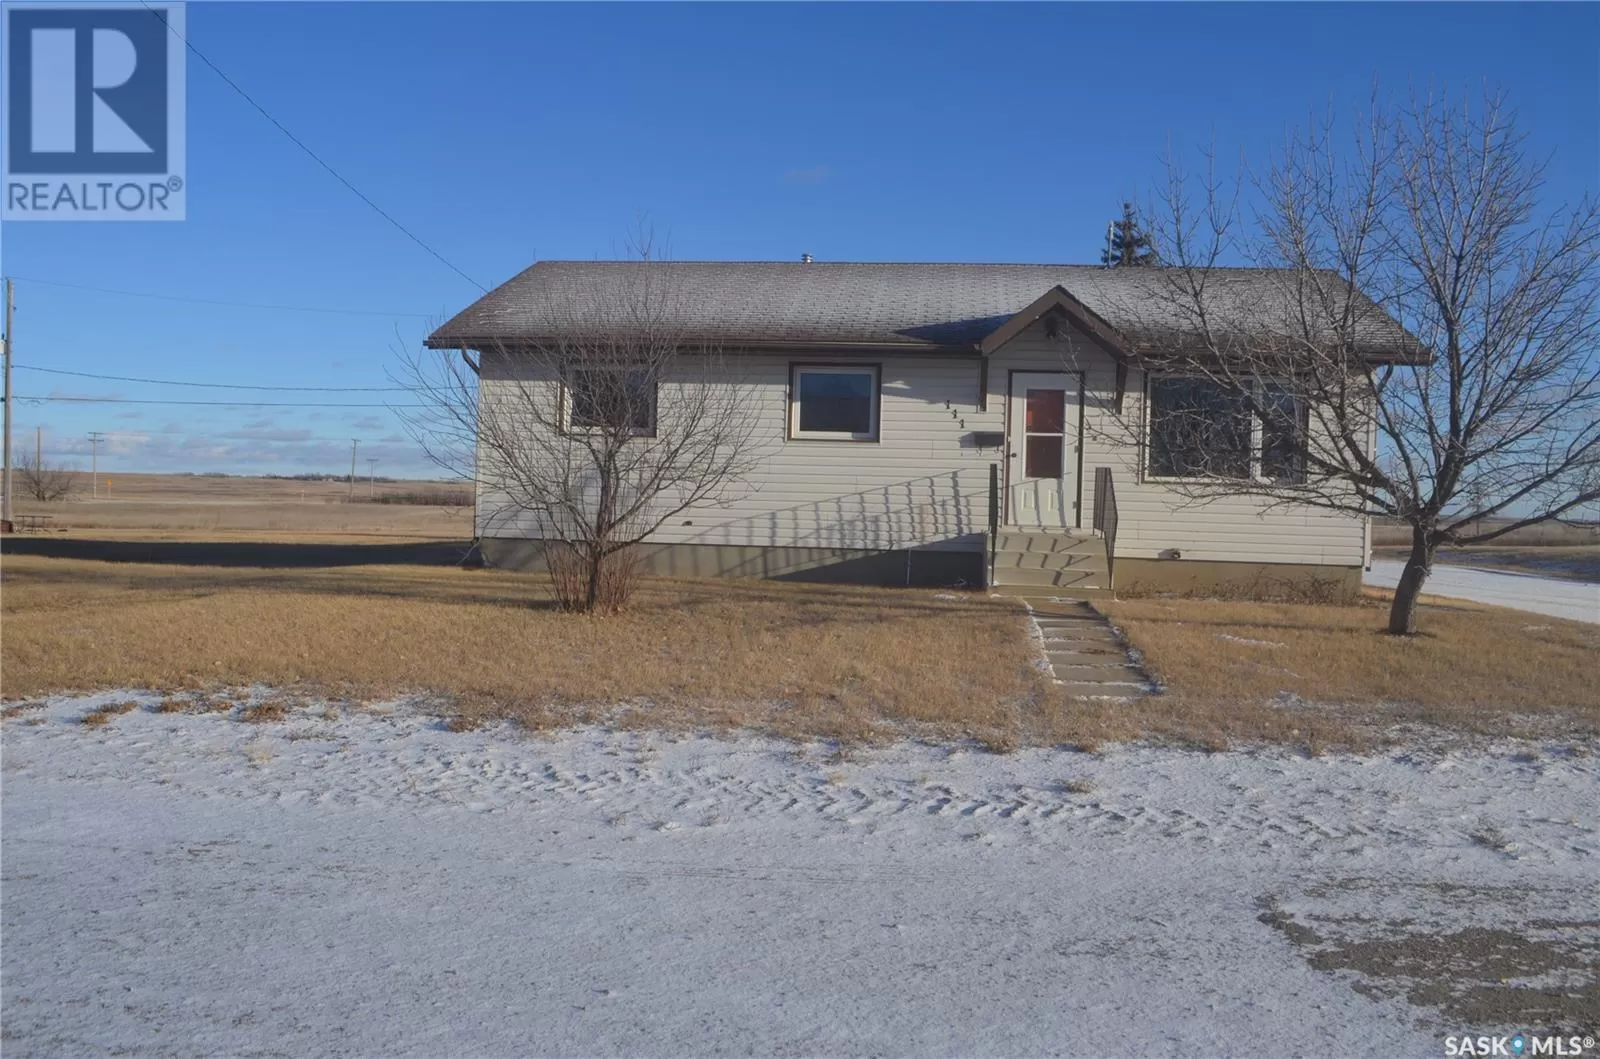 House for rent: 111 Ketcheson Street, Young, Saskatchewan S0K 4Y0